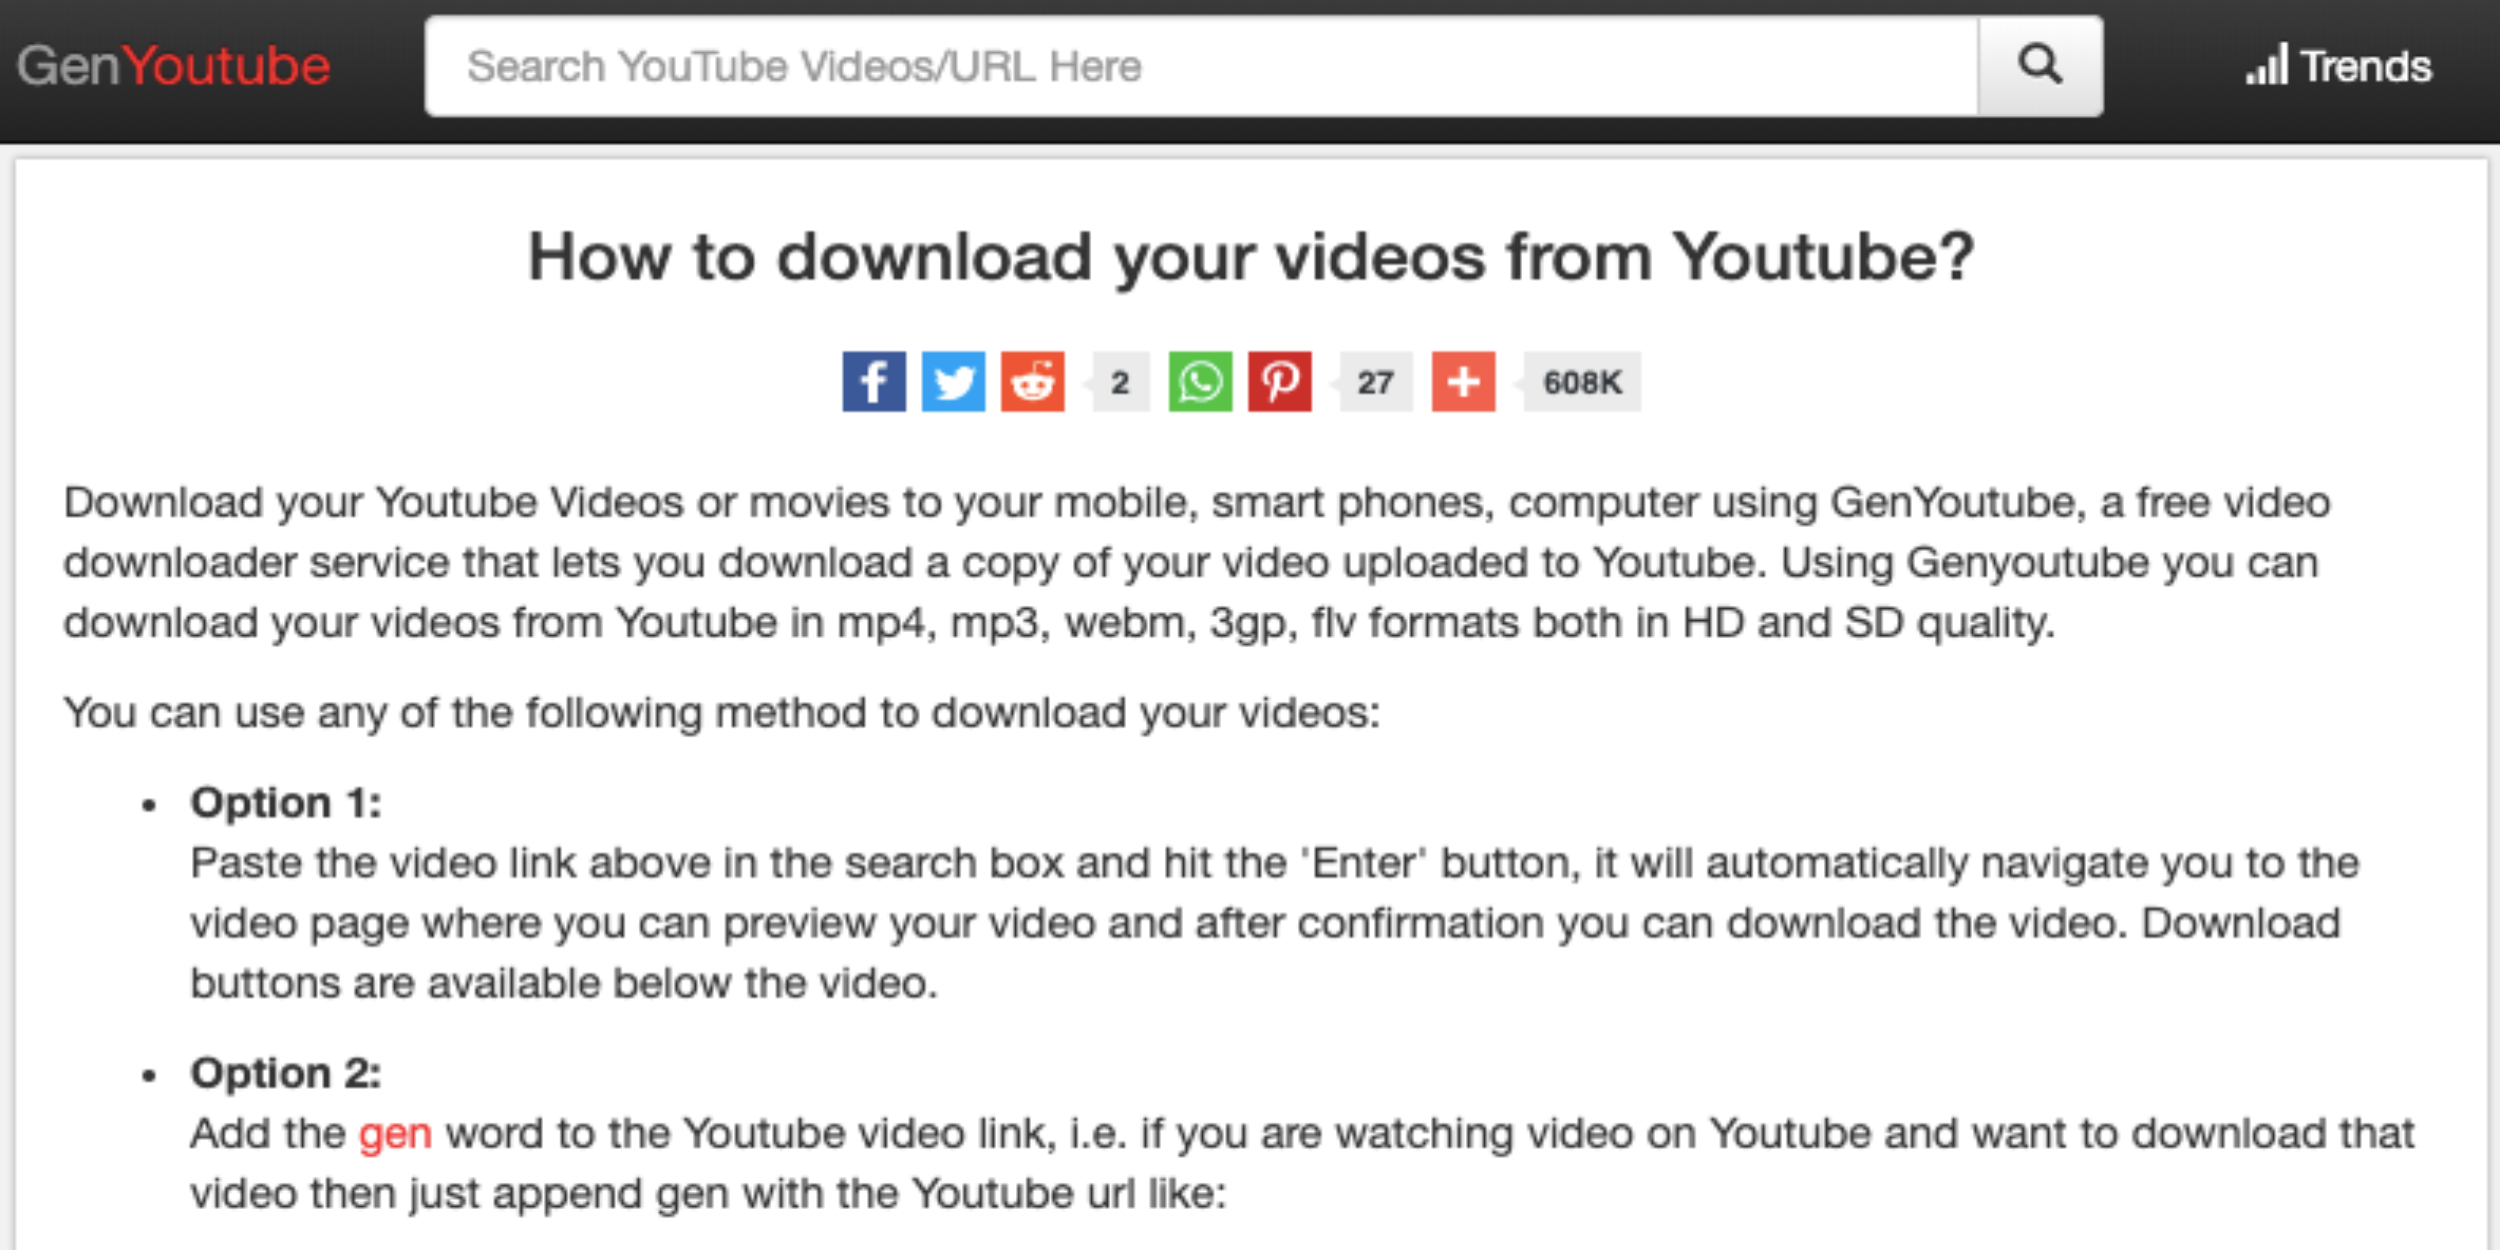 youtube to mp3 convert online